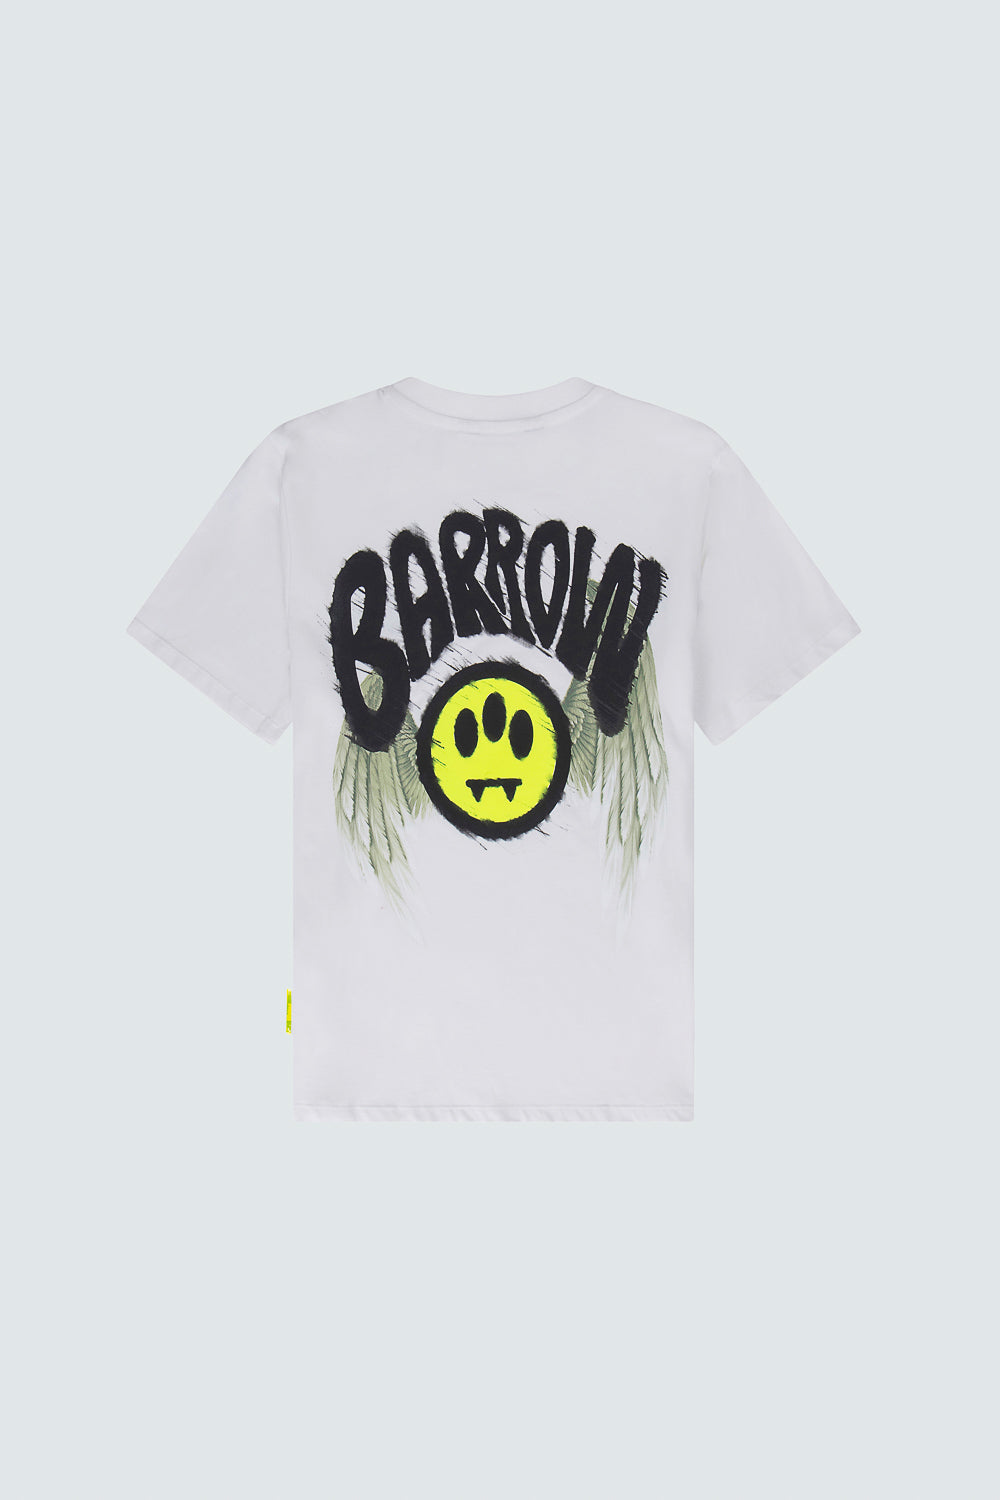 Buy the Barrow Chest Logo T-Shirt in White at Intro. Spend £50 for free UK delivery. Official stockists. We ship worldwide.